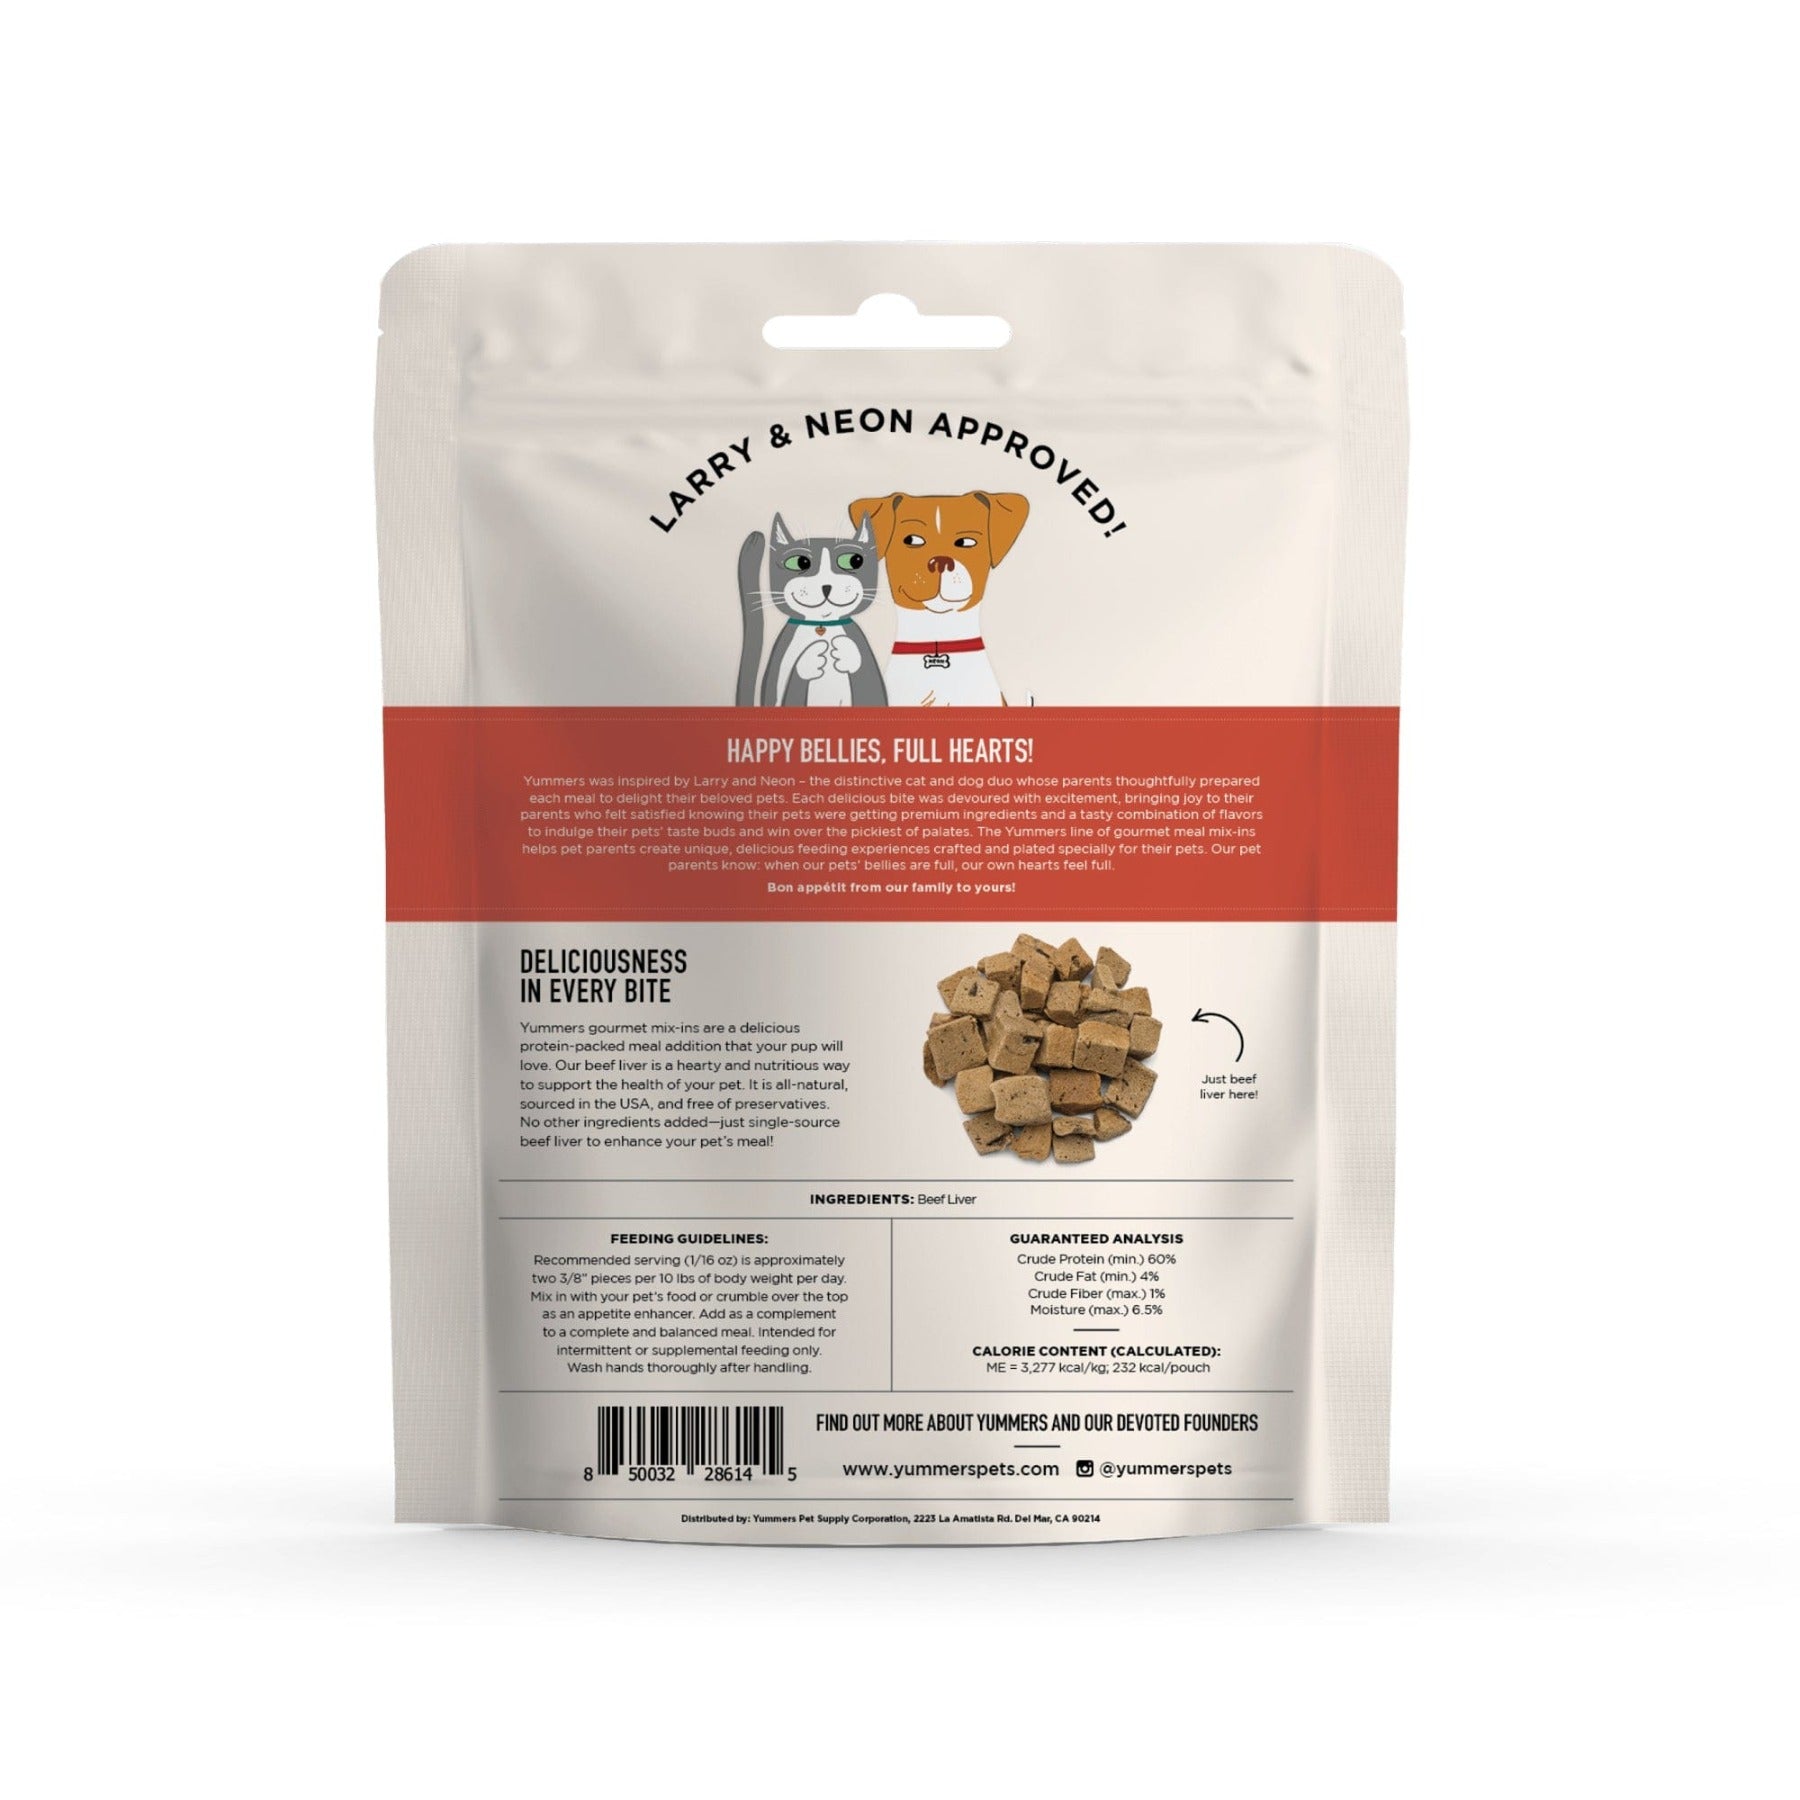 Freeze-dried Beef Liver Gourmet Meal Mix-in for Cats, 2.5 oz. - back